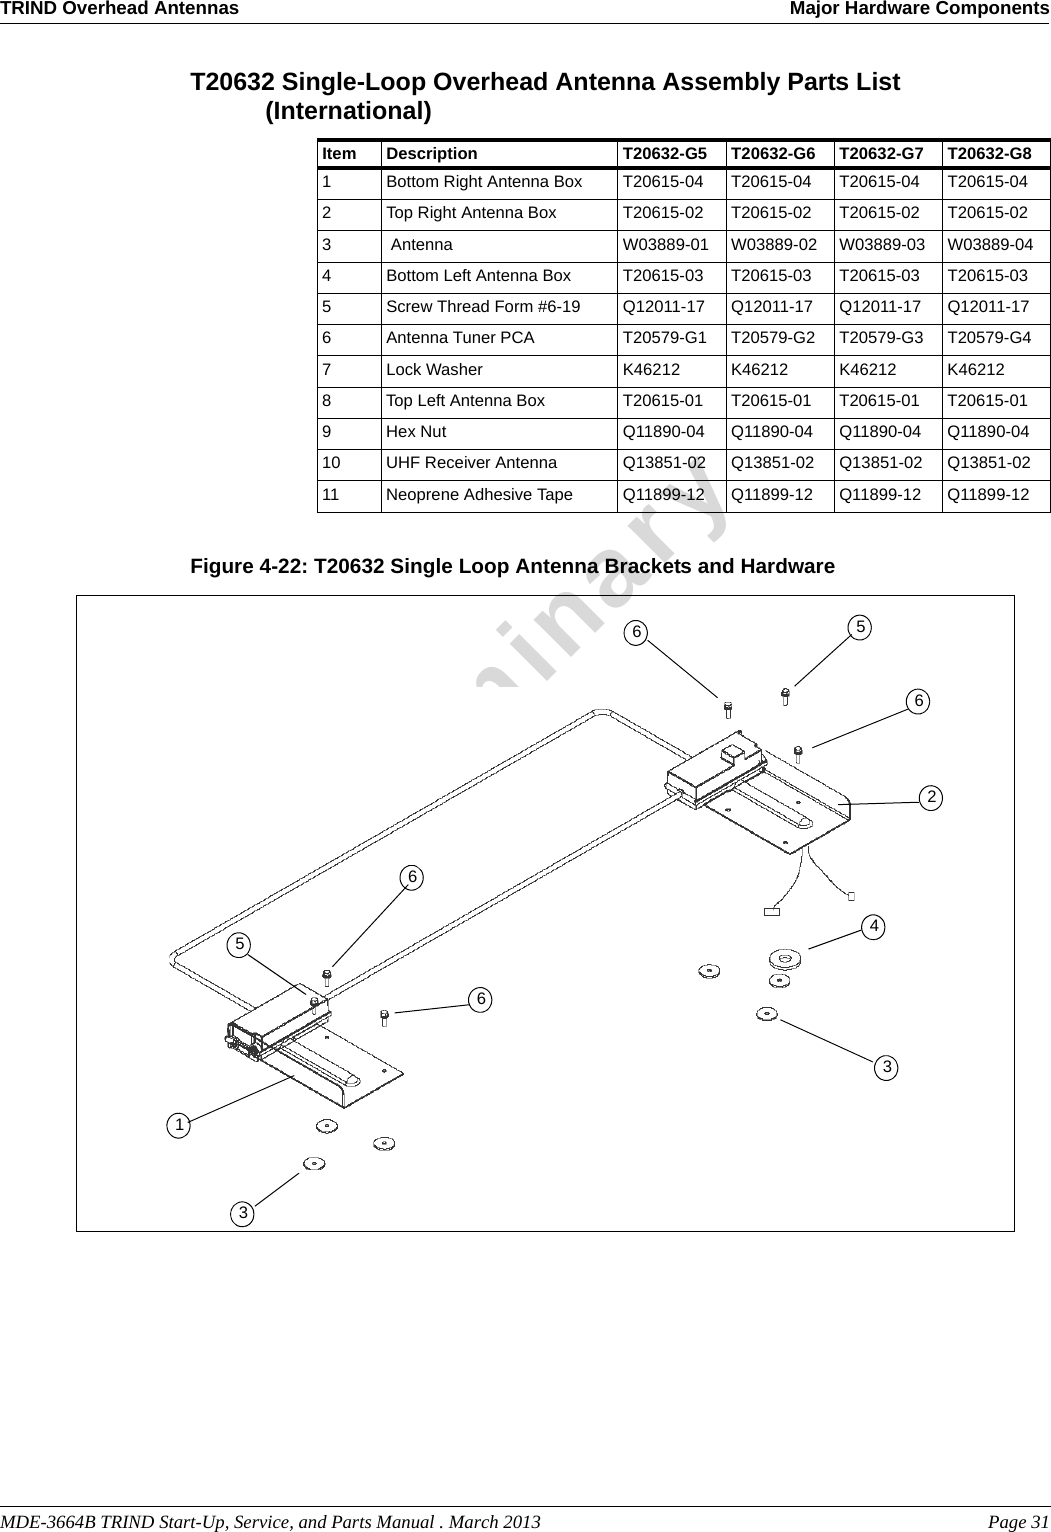 MDE-3664B TRIND Start-Up, Service, and Parts Manual . March 2013 Page 31TRIND Overhead Antennas Major Hardware ComponentsPreliminaryT20632 Single-Loop Overhead Antenna Assembly Parts List (International)Item Description T20632-G5 T20632-G6 T20632-G7 T20632-G81Bottom Right Antenna Box T20615-04 T20615-04 T20615-04 T20615-042Top Right Antenna Box T20615-02 T20615-02 T20615-02 T20615-023 Antenna W03889-01 W03889-02 W03889-03 W03889-044Bottom Left Antenna Box T20615-03 T20615-03 T20615-03 T20615-035Screw Thread Form #6-19 Q12011-17 Q12011-17 Q12011-17 Q12011-176Antenna Tuner PCA T20579-G1 T20579-G2 T20579-G3 T20579-G47Lock Washer K46212 K46212 K46212 K462128Top Left Antenna Box T20615-01 T20615-01 T20615-01 T20615-019Hex Nut Q11890-04 Q11890-04 Q11890-04 Q11890-0410 UHF Receiver Antenna Q13851-02 Q13851-02 Q13851-02 Q13851-0211 Neoprene Adhesive Tape Q11899-12 Q11899-12 Q11899-12 Q11899-12Figure 4-22: T20632 Single Loop Antenna Brackets and Hardware13566465623